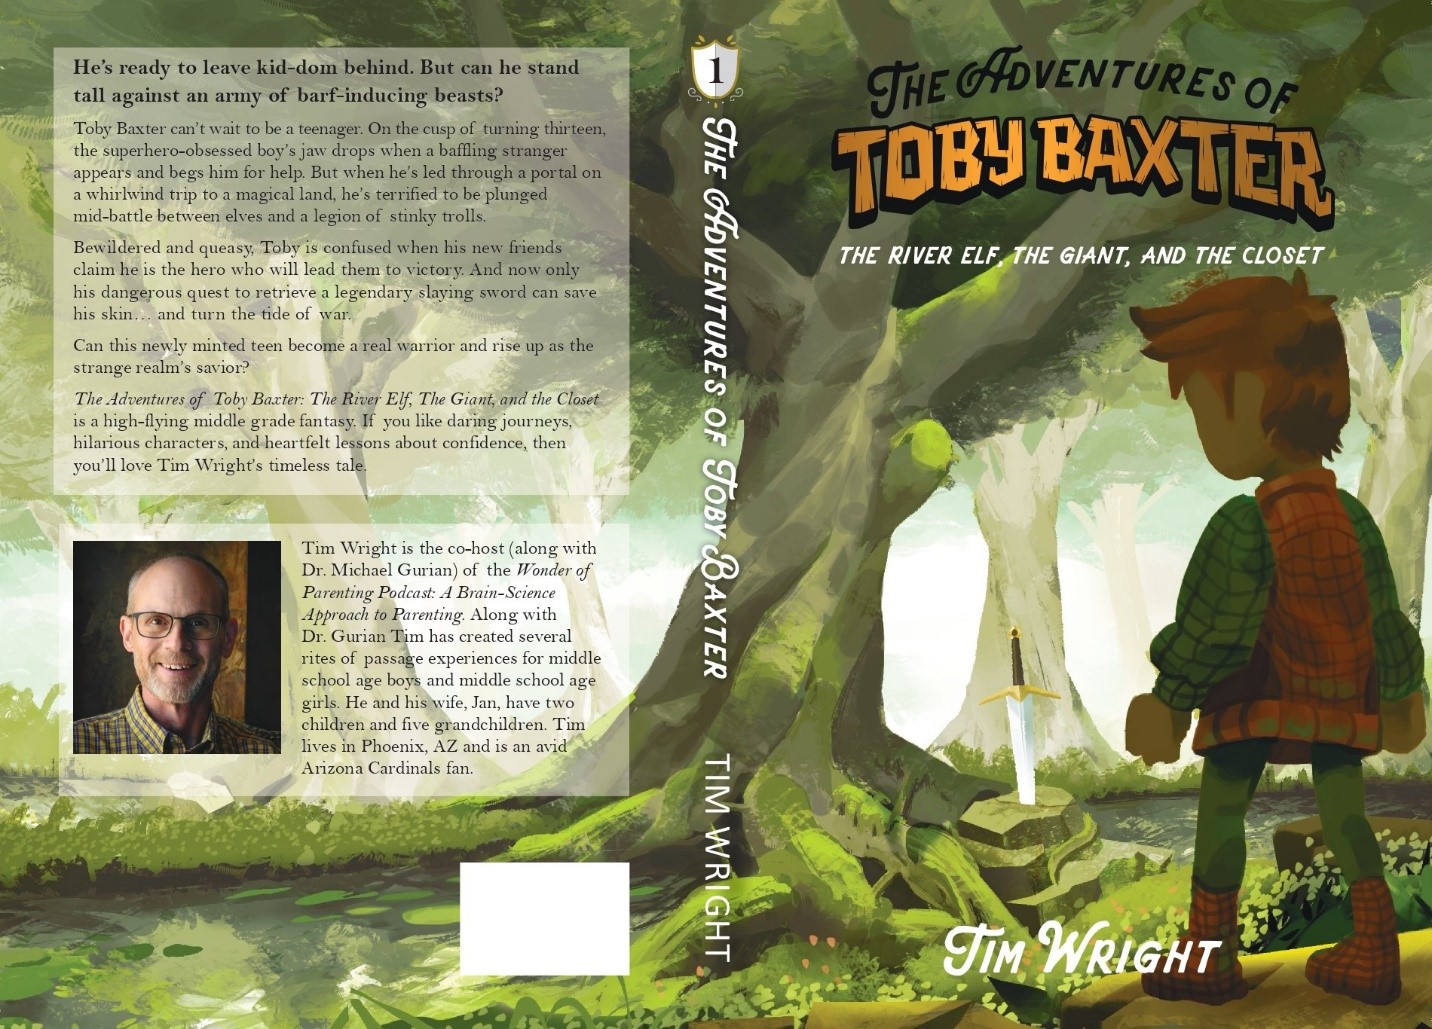 Book "The Adventures Of Toby Baxter" The River Elf, The Giant, and the Closet by Tim Wright